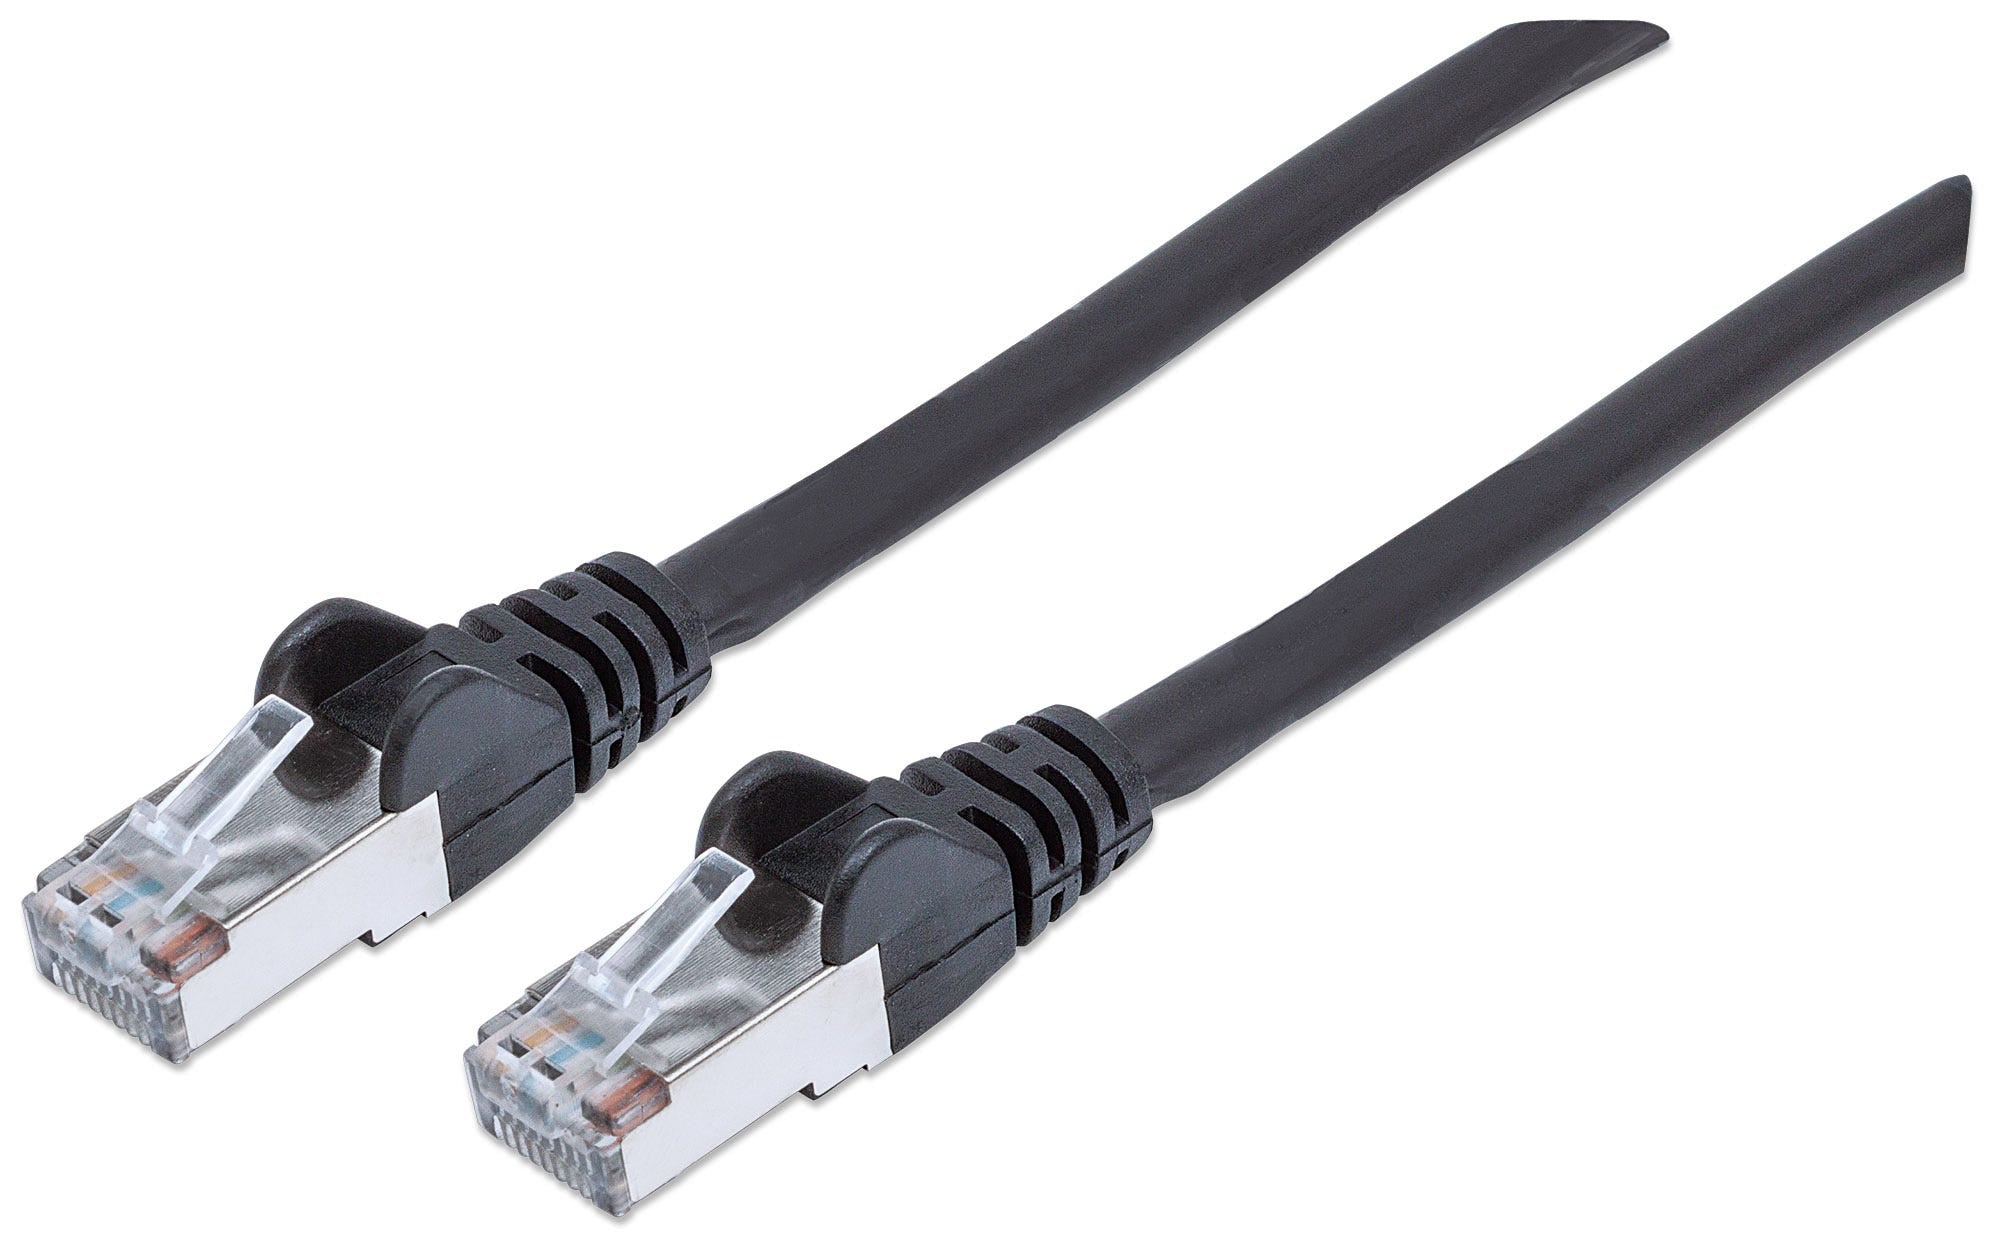 Intellinet Network Patch Cable, Cat6A, 0.5m, Black, Copper, S/FTP, LSOH / LSZH, PVC, RJ45, Gold Plated Contacts, Snagless, Booted, Lifetime Warranty, Polybag